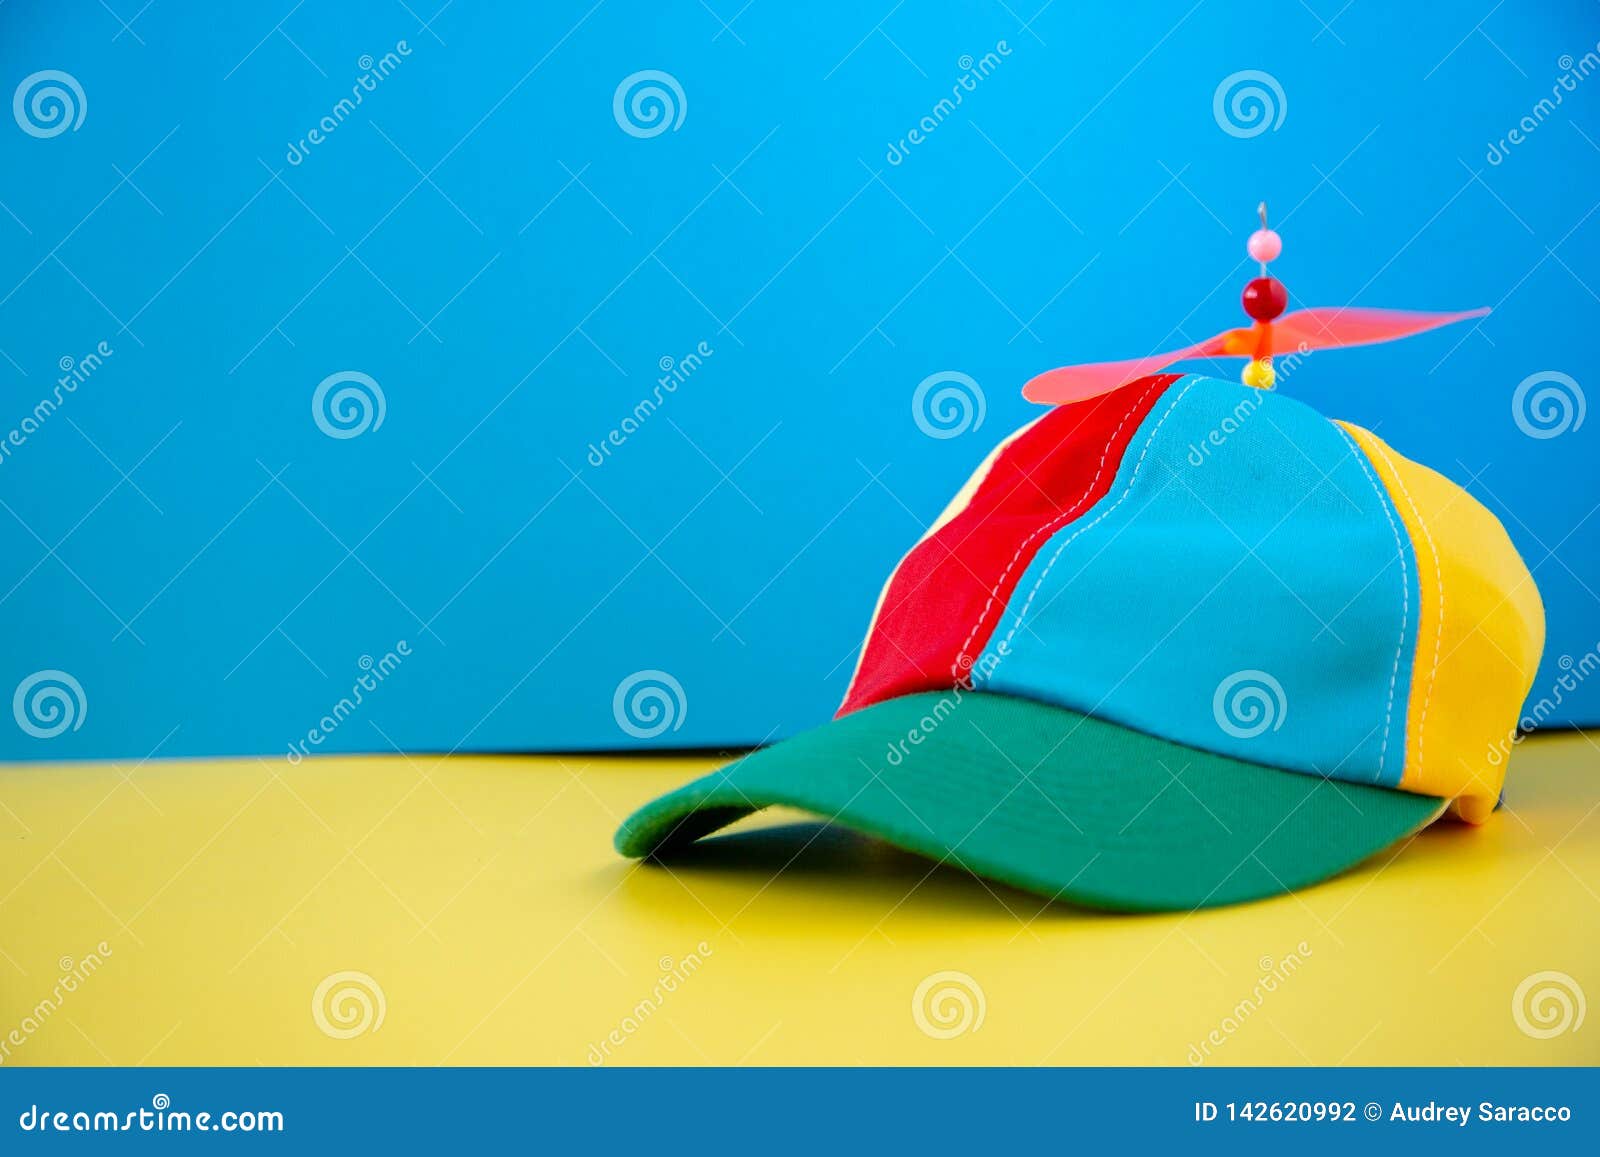 A Colorful Propeller Hat on a Background Stock Photo - Image of